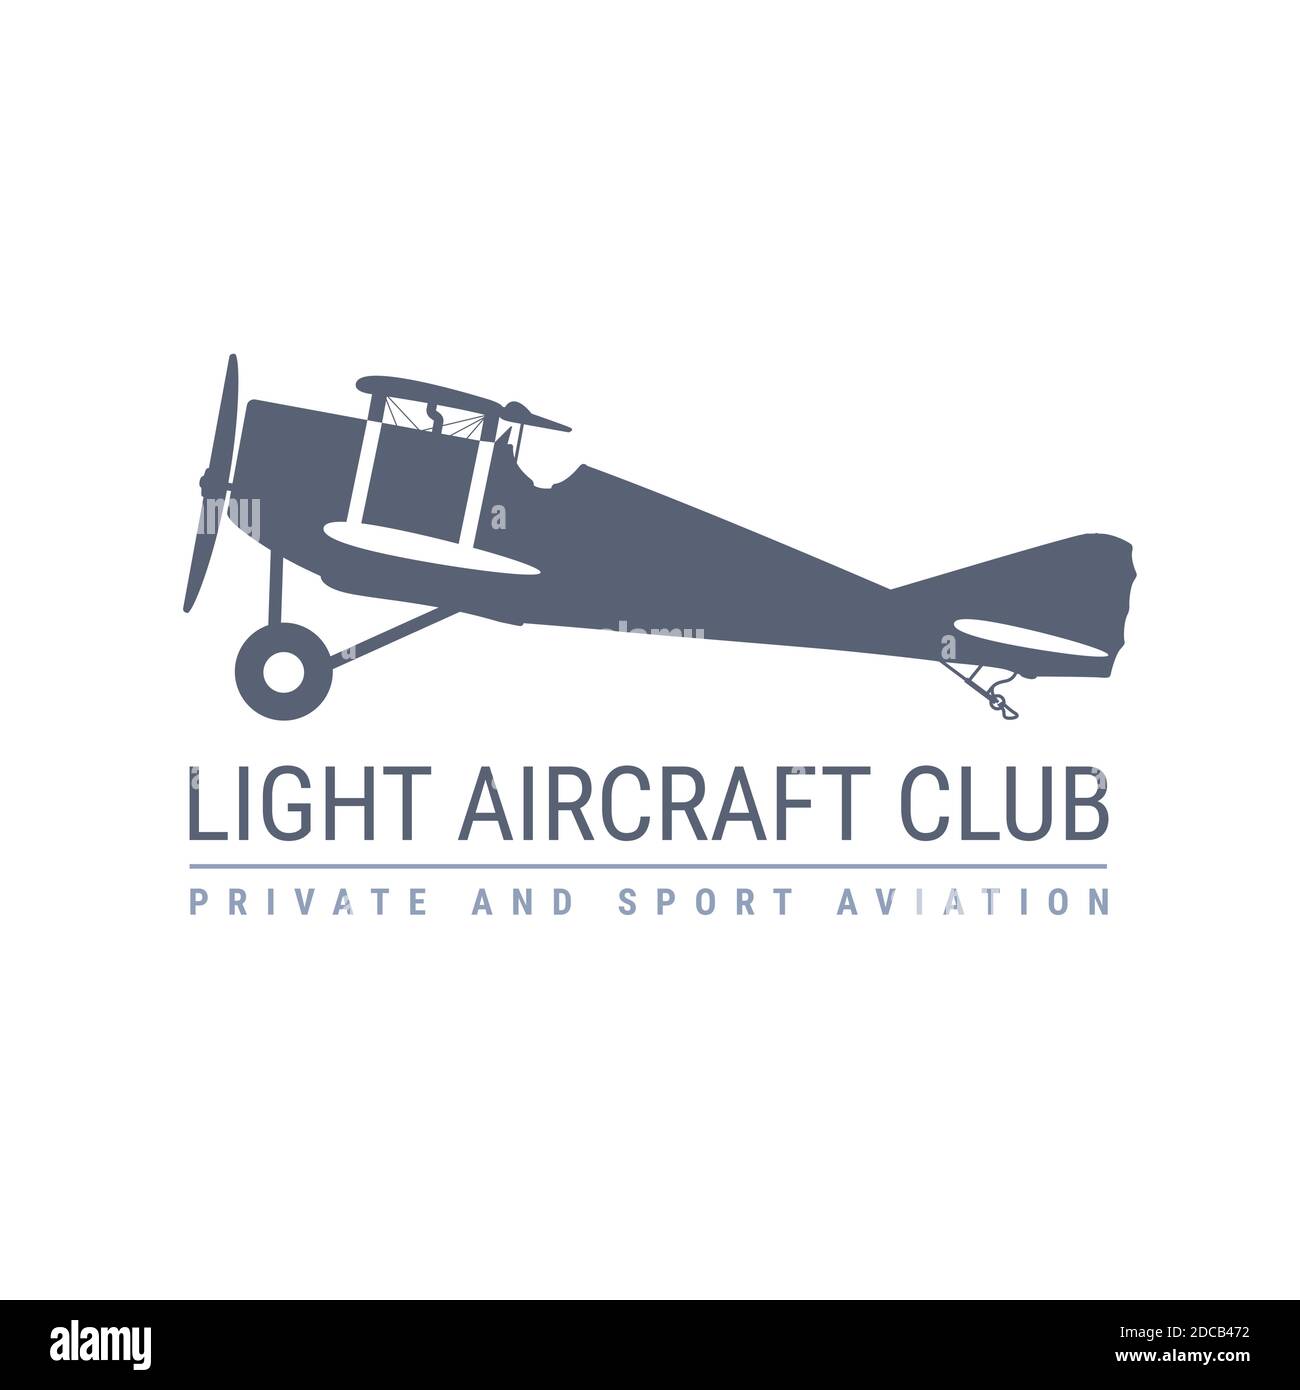 Light aviation emblem with retro airplane, biplane side view, propeller aircraft logo, vector illustration Stock Vector